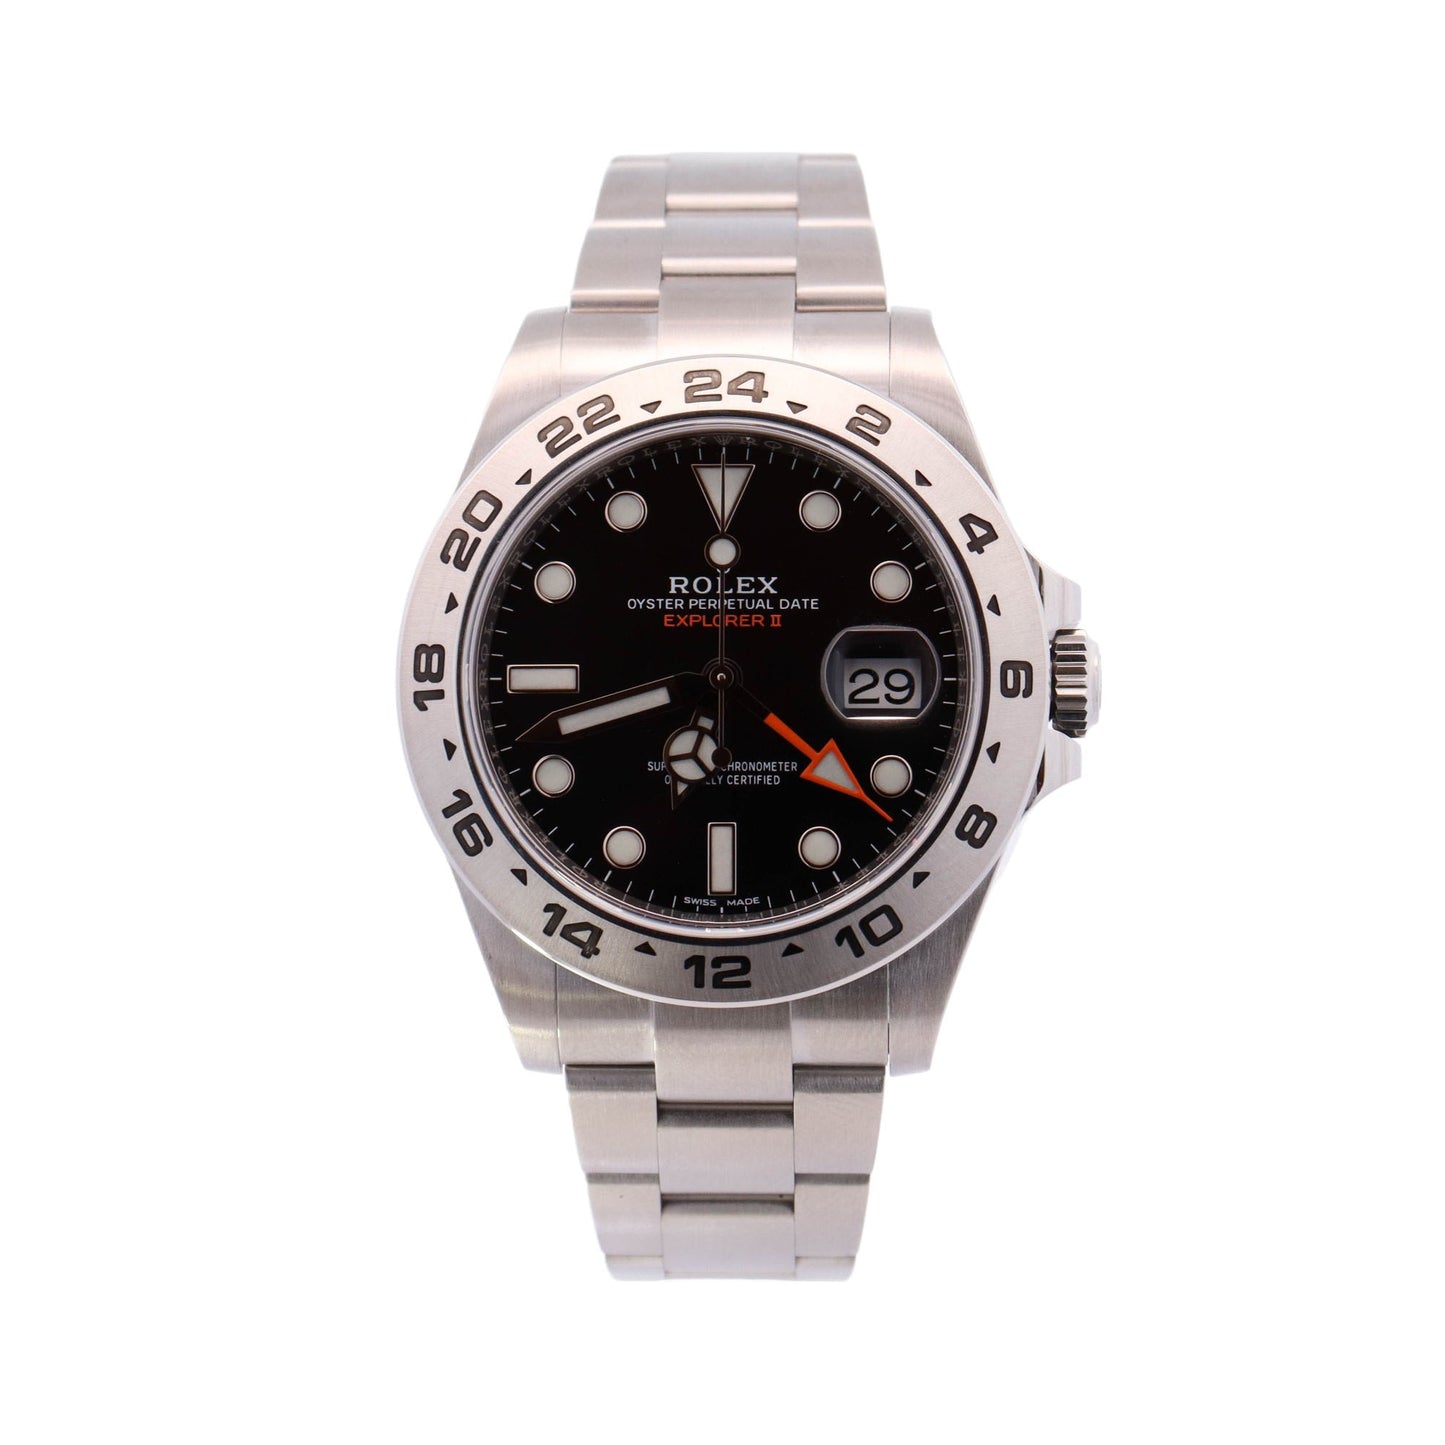 Rolex Explorer II Stainless Steel 42mm Black Dot Dial Watch Reference #: 216570